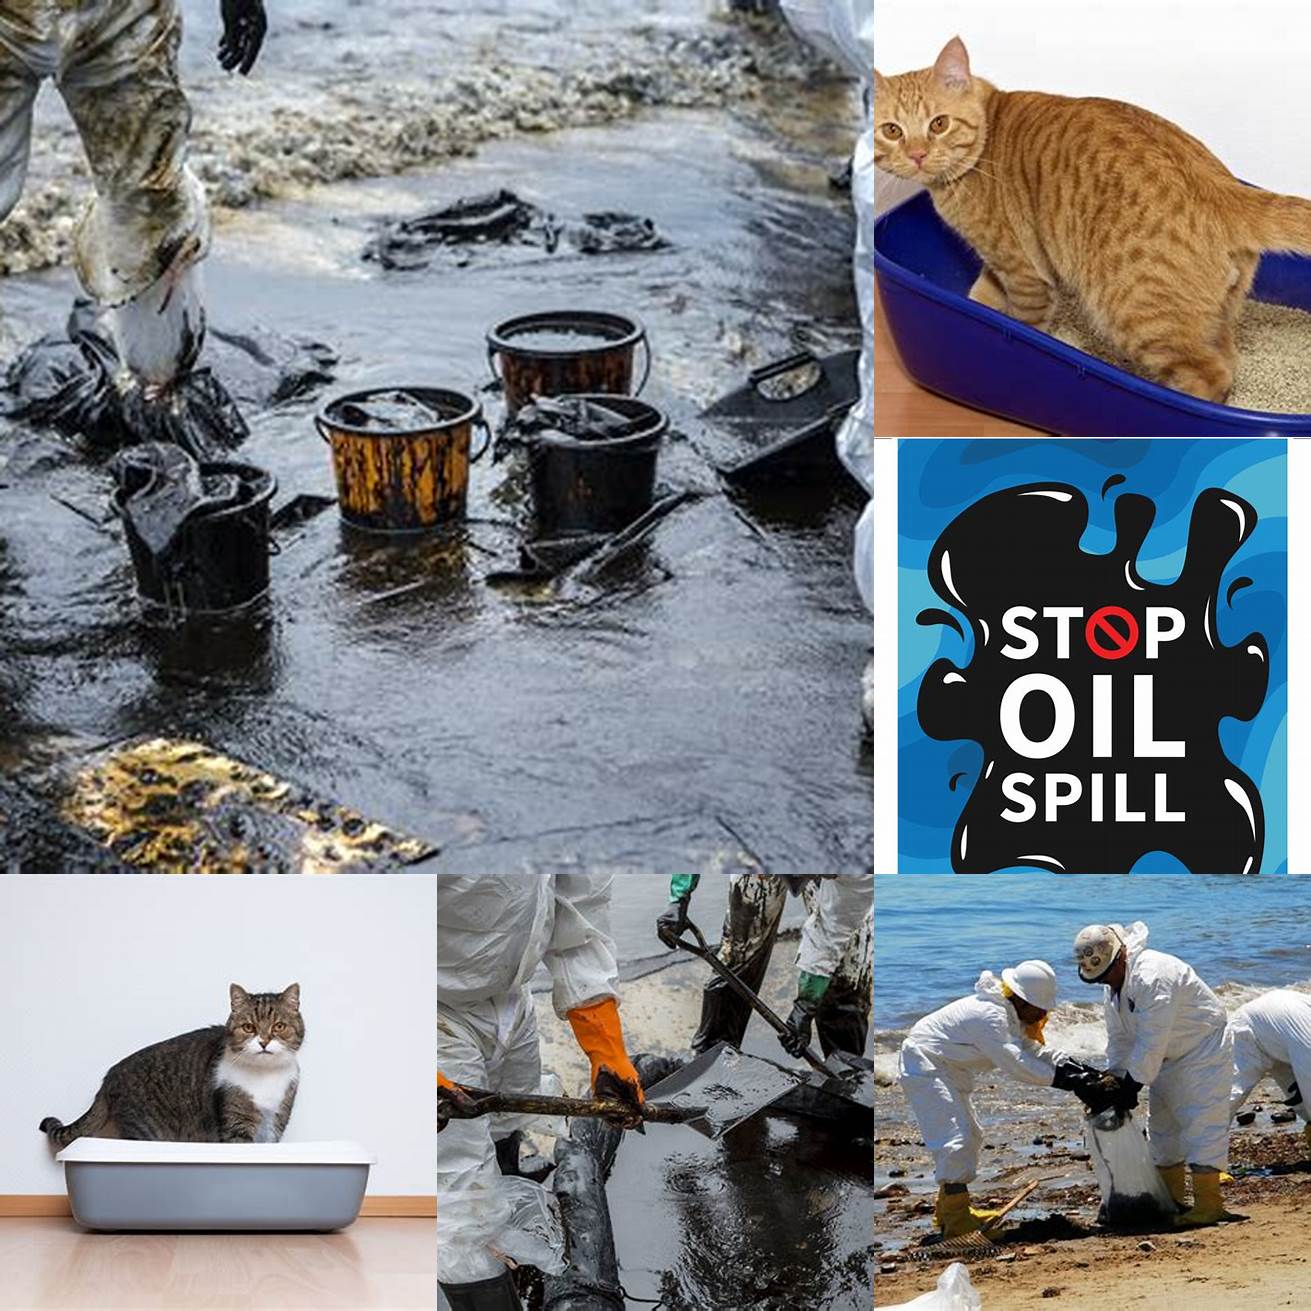 Prevention Cat litter can be used to prevent oil spills from happening in the first place